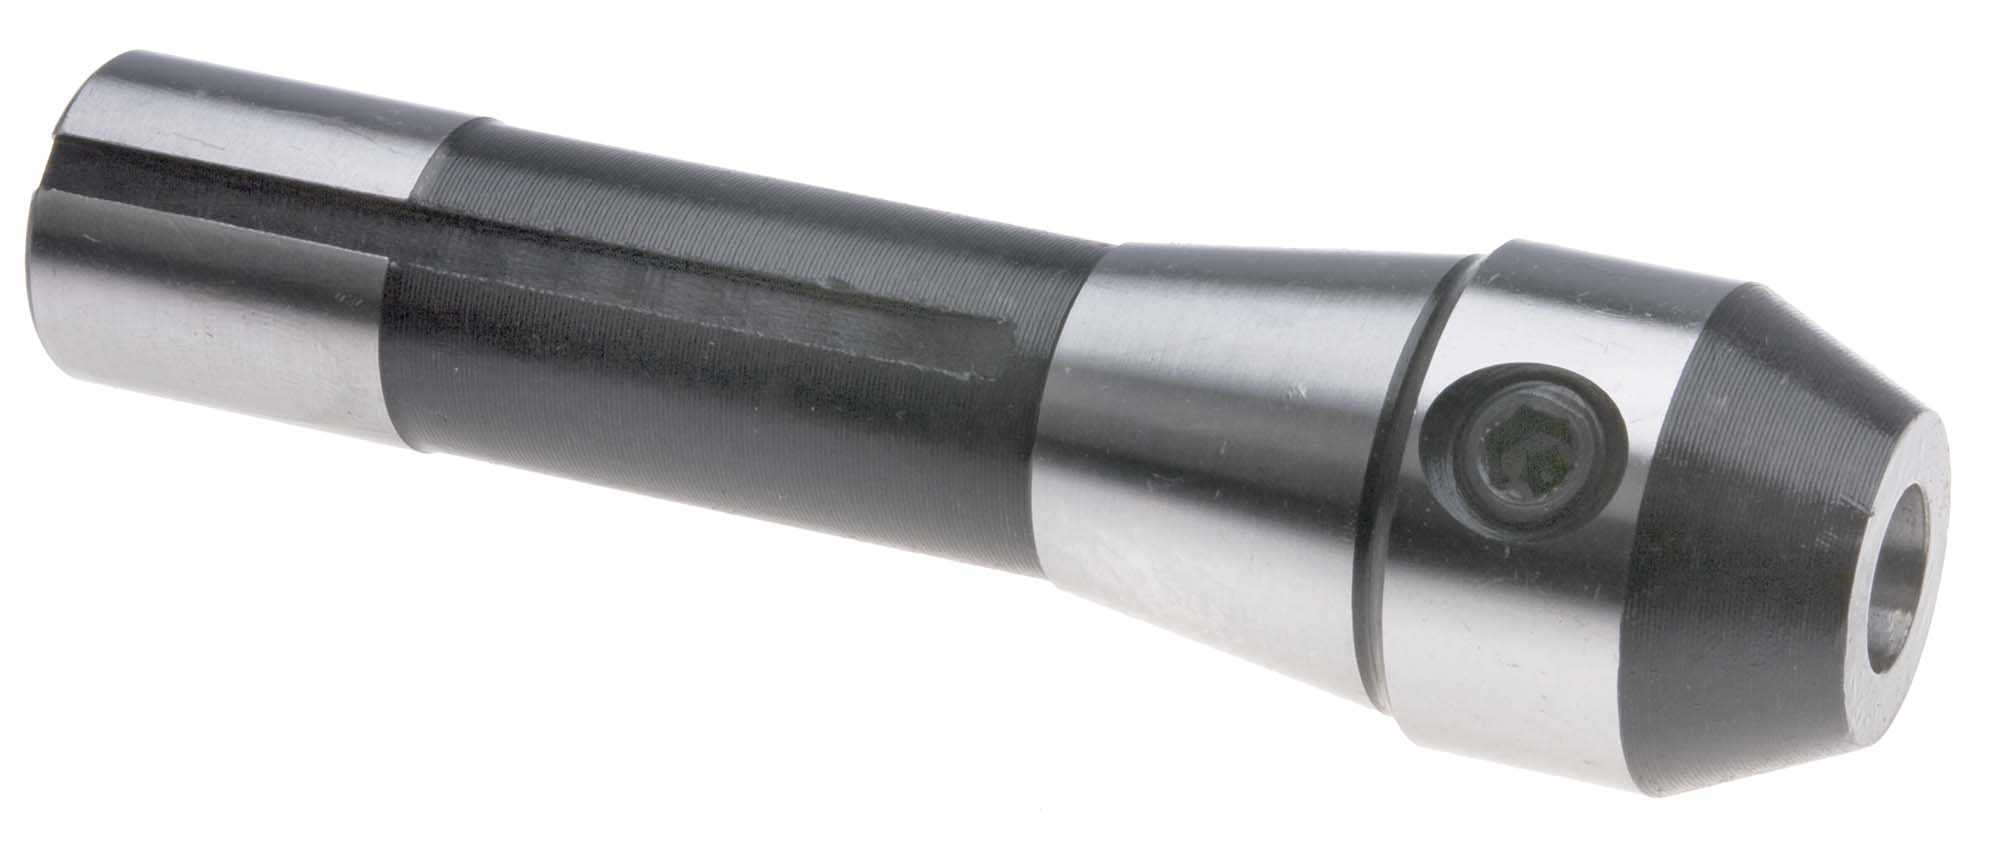 5/8" R8 End Mill Adapter